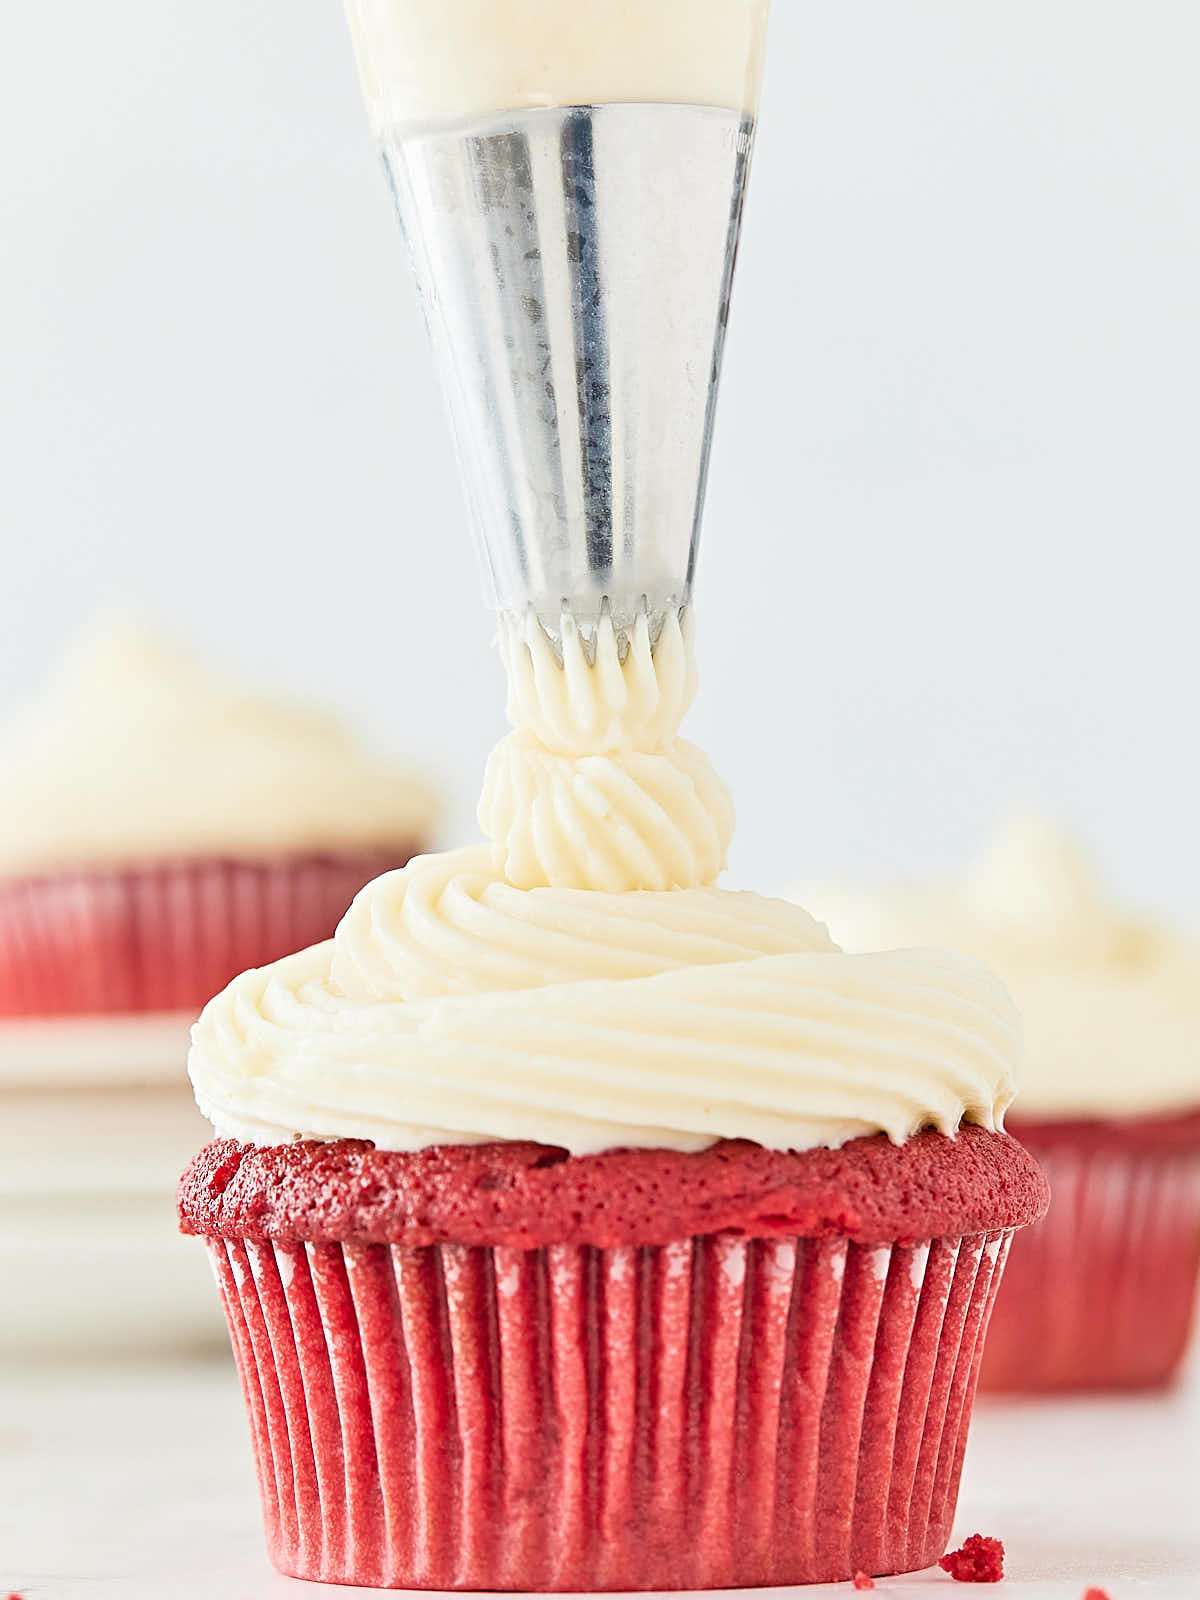 A red velvet cupcake being frosted with icing.